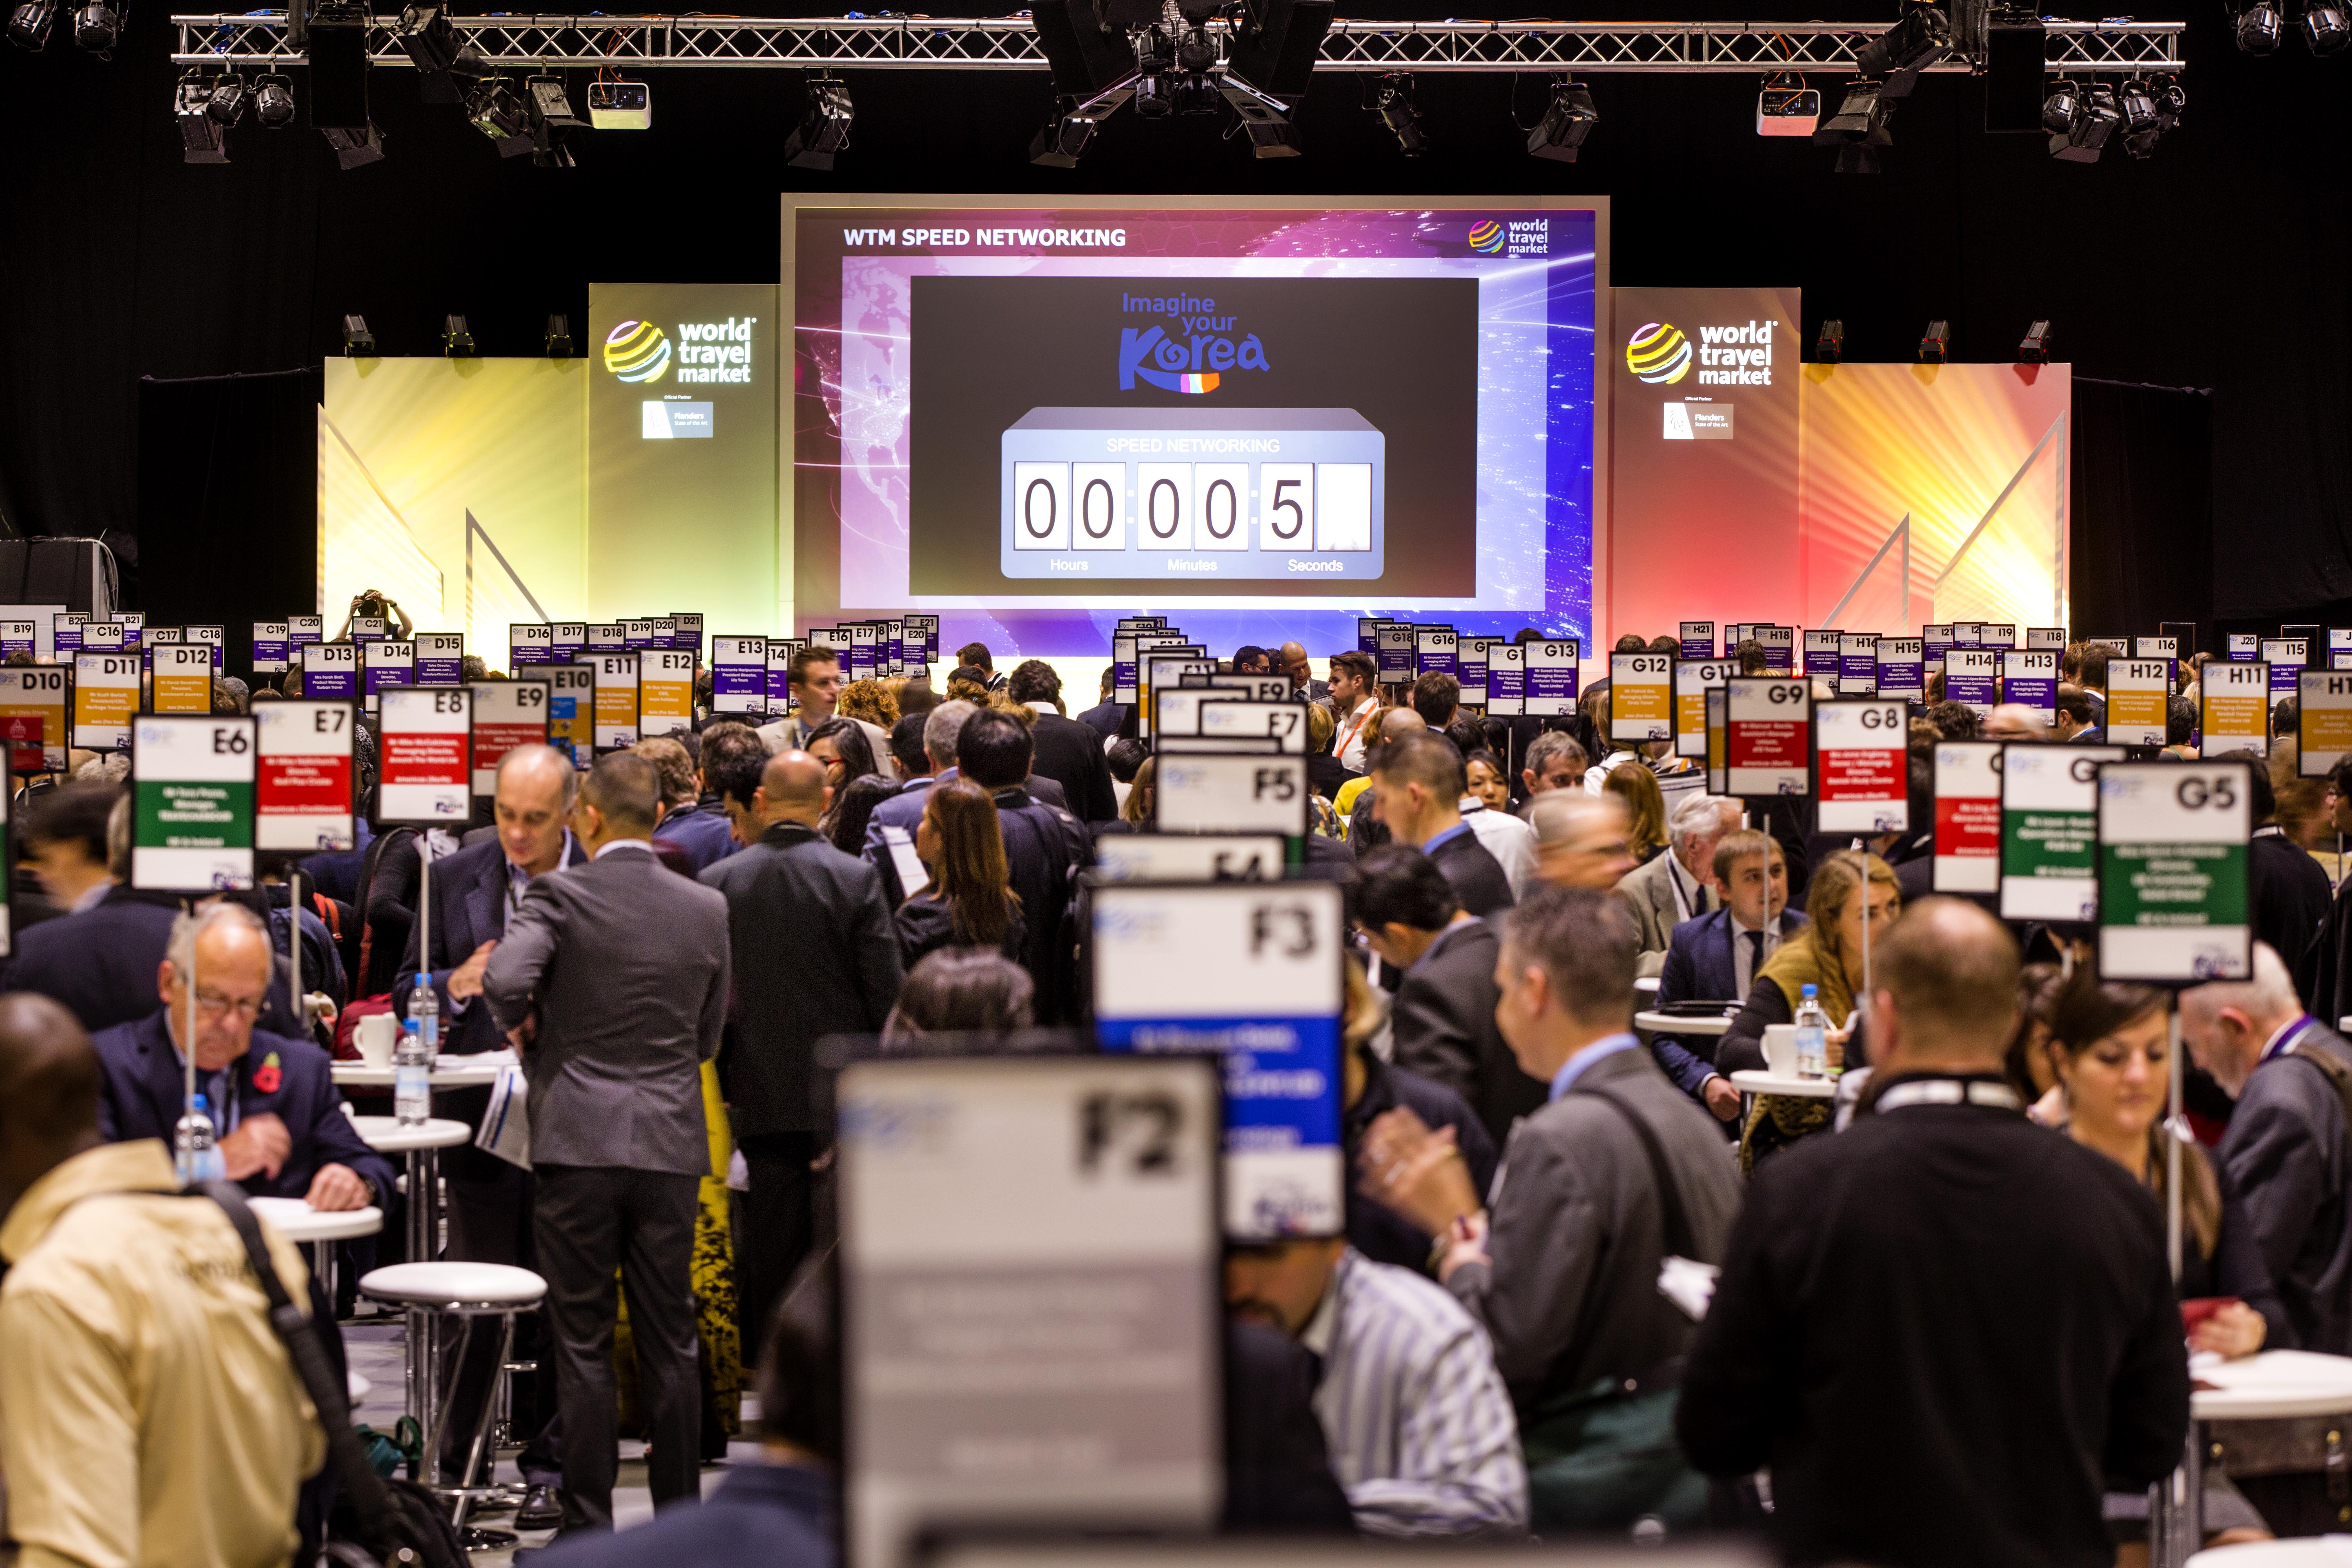 Register Now for WTM London Speed Networking Programme